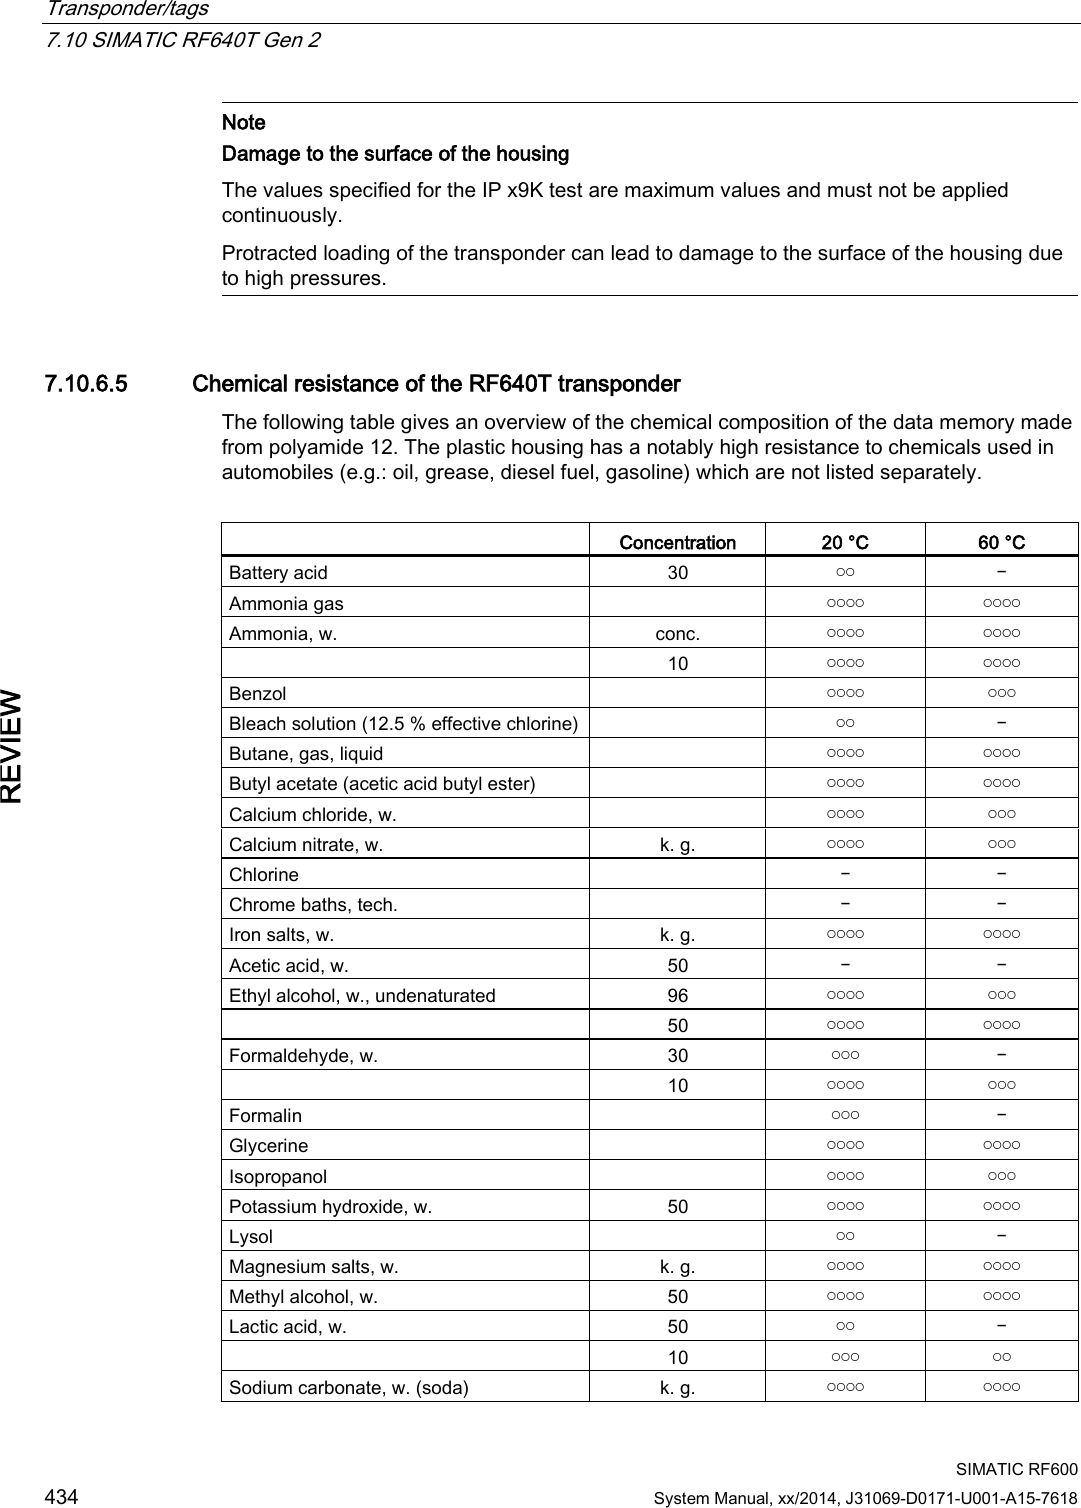 Transponder/tags   7.10 SIMATIC RF640T Gen 2  SIMATIC RF600 434 System Manual, xx/2014, J31069-D0171-U001-A15-7618 REVIEW  Note Damage to the surface of the housing The values specified for the IP x9K test are maximum values and must not be applied continuously. Protracted loading of the transponder can lead to damage to the surface of the housing due to high pressures.   7.10.6.5 Chemical resistance of the RF640T transponder The following table gives an overview of the chemical composition of the data memory made from polyamide 12. The plastic housing has a notably high resistance to chemicals used in automobiles (e.g.: oil, grease, diesel fuel, gasoline) which are not listed separately.   Concentration 20 °C 60 °C Battery acid 30 ￮￮ ￚ Ammonia gas  ￮￮￮￮ ￮￮￮￮ Ammonia, w. conc. ￮￮￮￮ ￮￮￮￮  10 ￮￮￮￮ ￮￮￮￮ Benzol  ￮￮￮￮ ￮￮￮ Bleach solution (12.5 % effective chlorine)  ￮￮ ￚ Butane, gas, liquid  ￮￮￮￮ ￮￮￮￮ Butyl acetate (acetic acid butyl ester)  ￮￮￮￮ ￮￮￮￮ Calcium chloride, w.  ￮￮￮￮ ￮￮￮ Calcium nitrate, w. k. g. ￮￮￮￮ ￮￮￮ Chlorine  ￚ ￚ Chrome baths, tech.    ￚ ￚ Iron salts, w. k. g. ￮￮￮￮ ￮￮￮￮ Acetic acid, w. 50 ￚ ￚ Ethyl alcohol, w., undenaturated 96 ￮￮￮￮ ￮￮￮  50 ￮￮￮￮ ￮￮￮￮ Formaldehyde, w. 30 ￮￮￮ ￚ  10 ￮￮￮￮ ￮￮￮ Formalin  ￮￮￮ ￚ Glycerine  ￮￮￮￮ ￮￮￮￮ Isopropanol  ￮￮￮￮ ￮￮￮ Potassium hydroxide, w. 50 ￮￮￮￮ ￮￮￮￮ Lysol  ￮￮ ￚ Magnesium salts, w. k. g. ￮￮￮￮ ￮￮￮￮ Methyl alcohol, w. 50 ￮￮￮￮ ￮￮￮￮ Lactic acid, w. 50 ￮￮ ￚ  10 ￮￮￮ ￮￮ Sodium carbonate, w. (soda) k. g. ￮￮￮￮ ￮￮￮￮ 